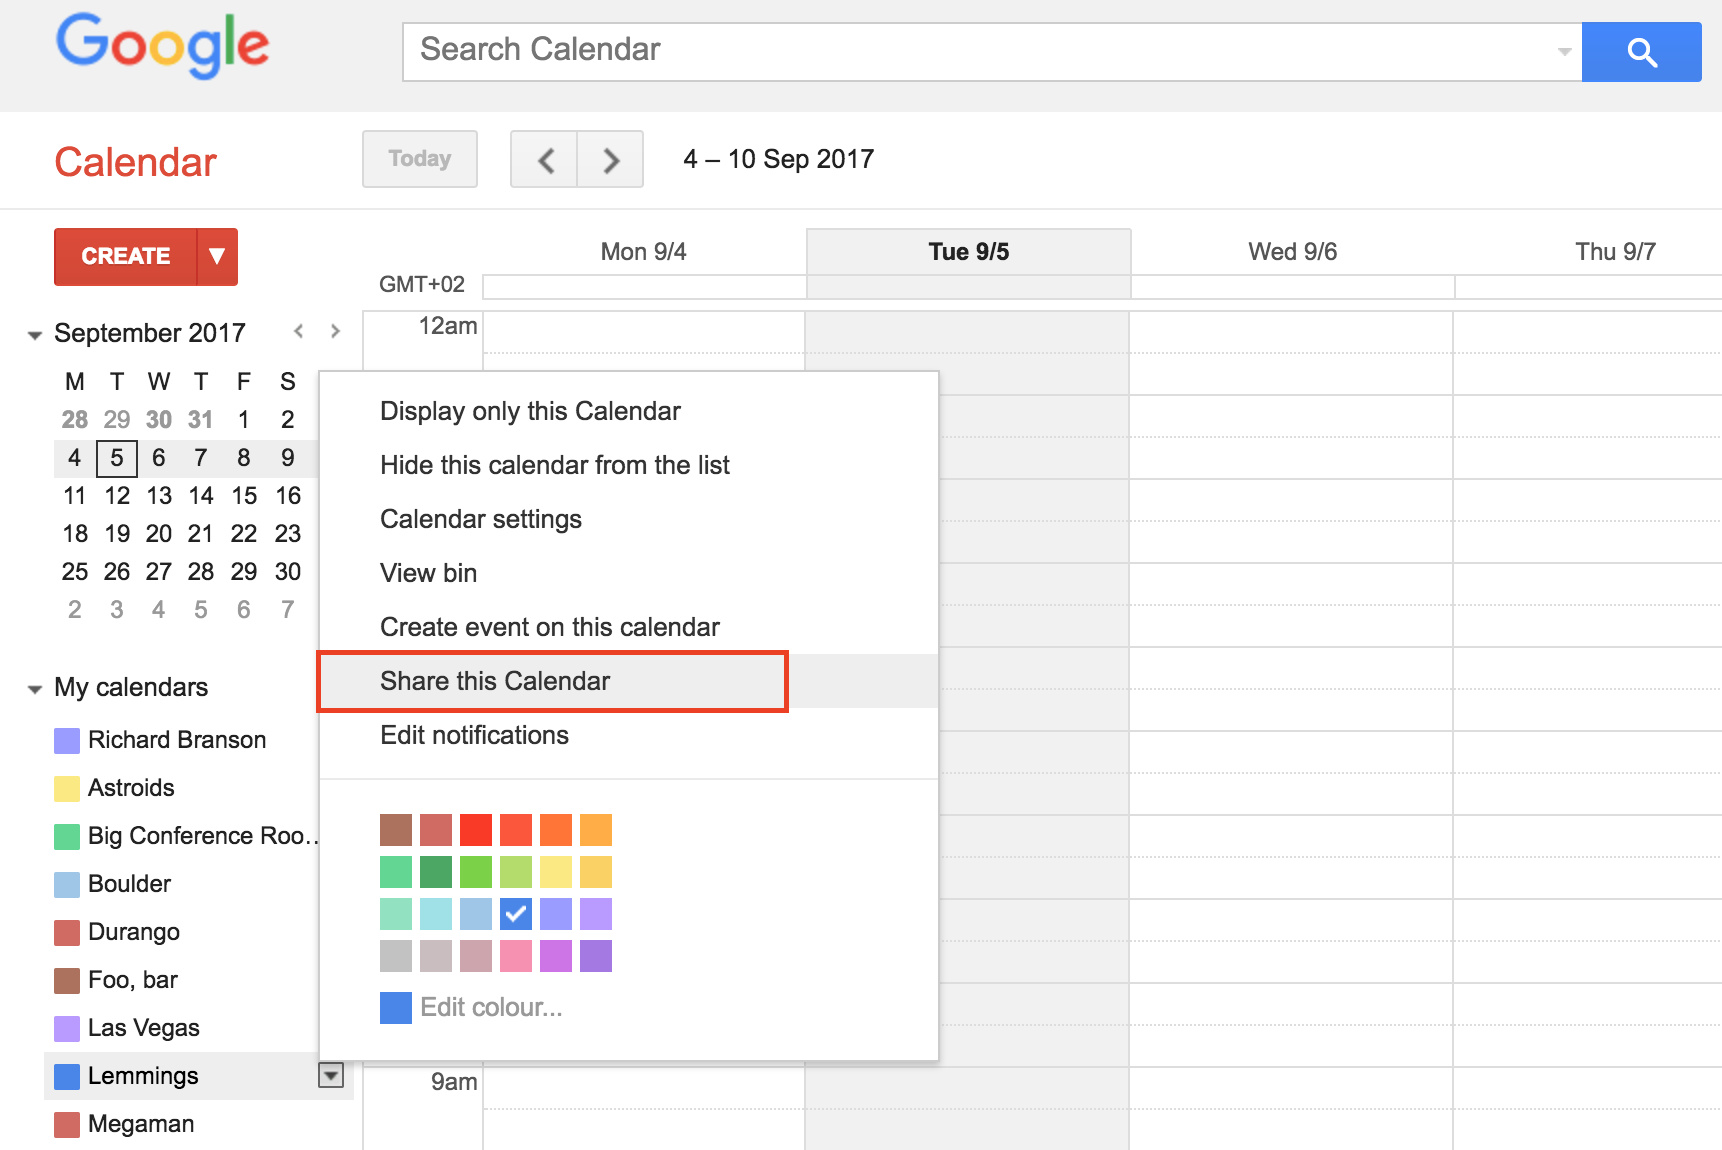 G Suite share this calendar